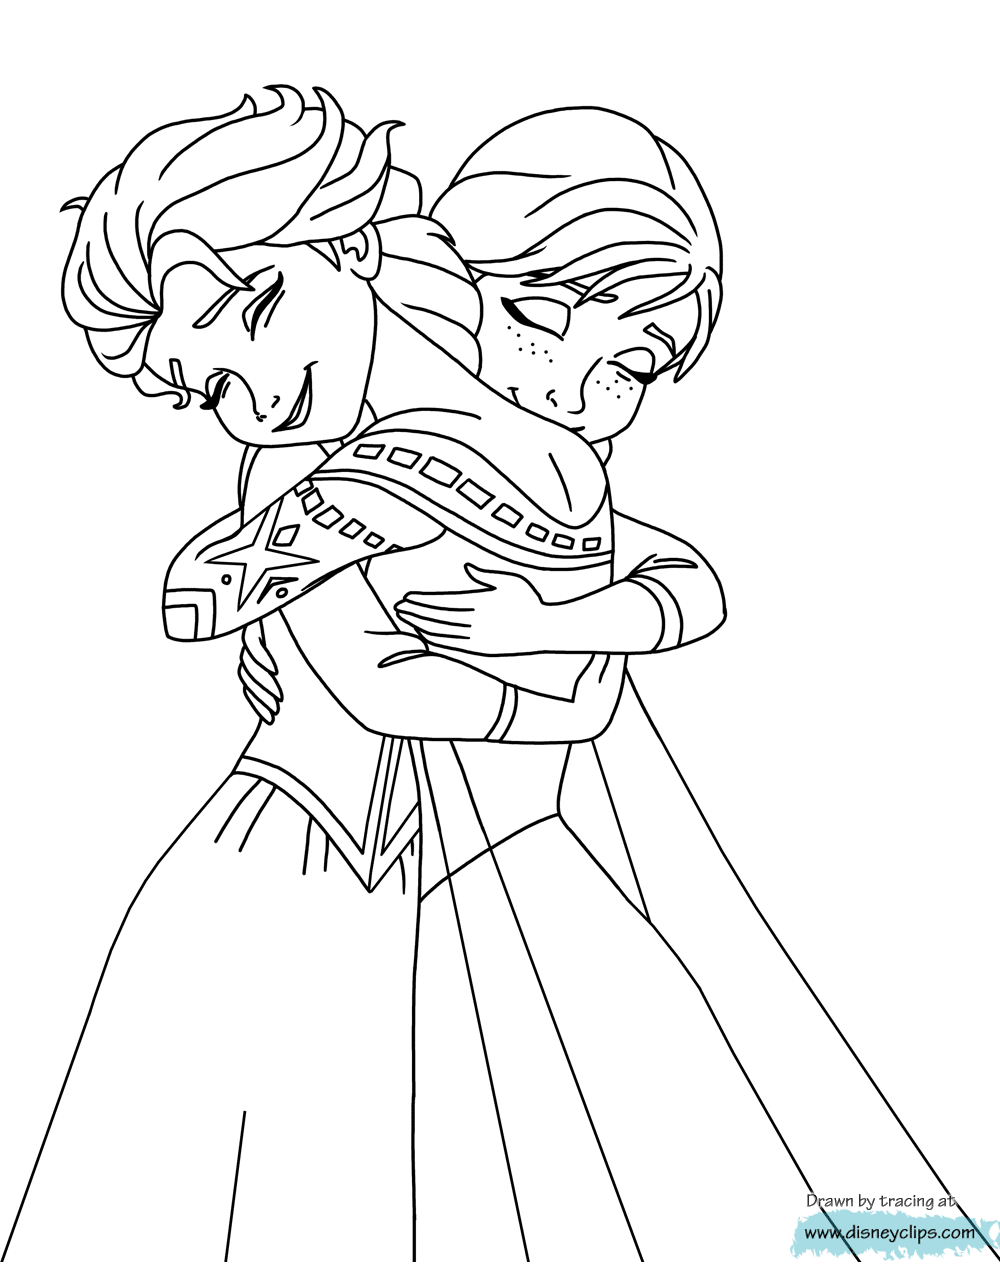 anna-and-elsa-hugging-coloring-page